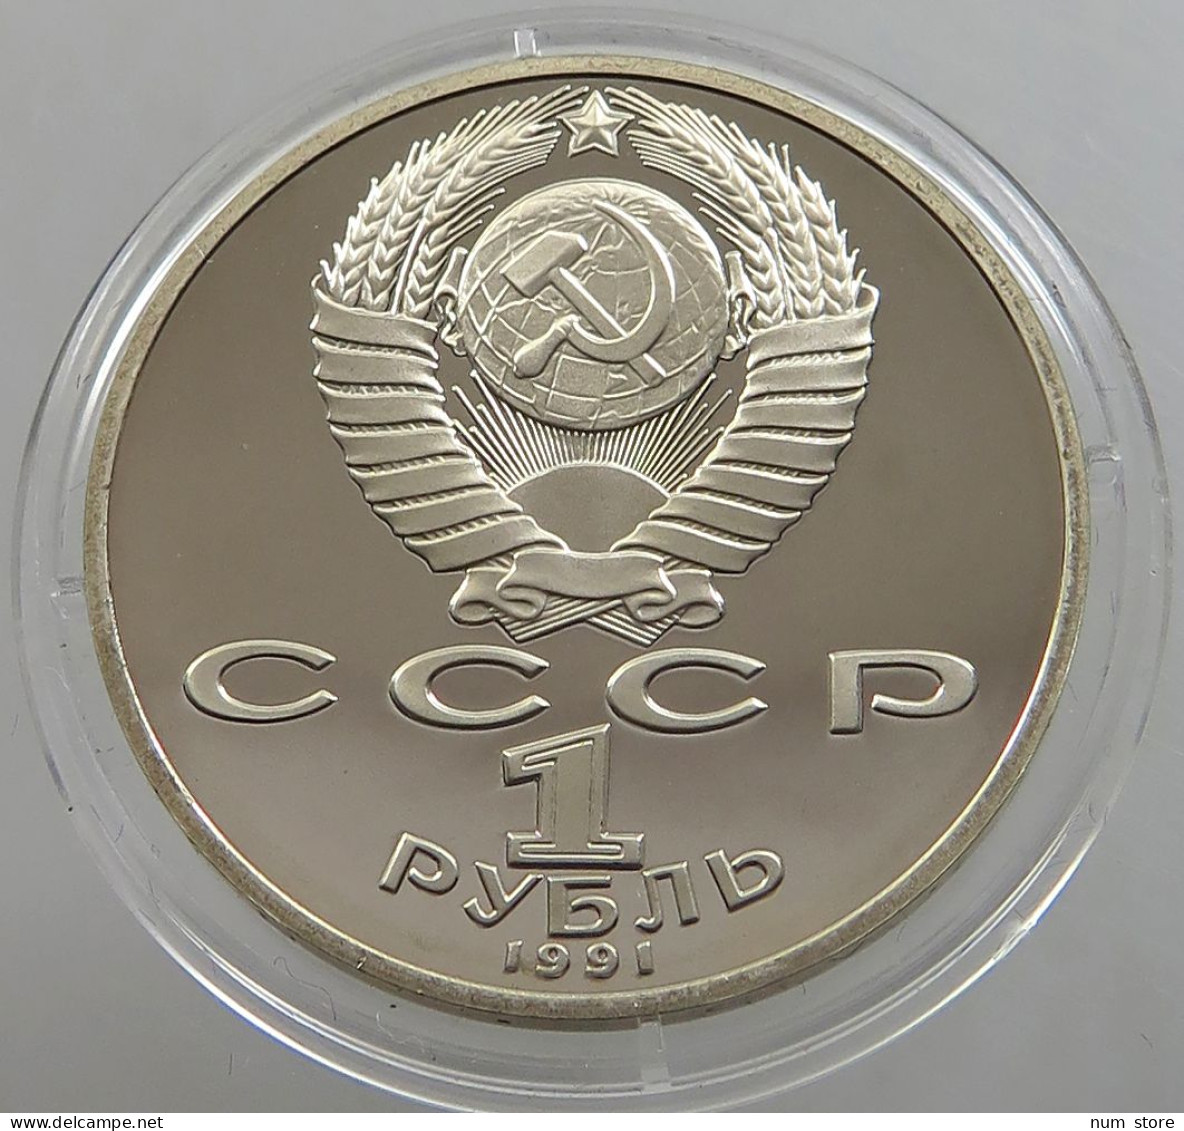 RUSSIA USSR 1 ROUBLE 1991 LEBEDEV PROOF #sm14 0627 - Russia